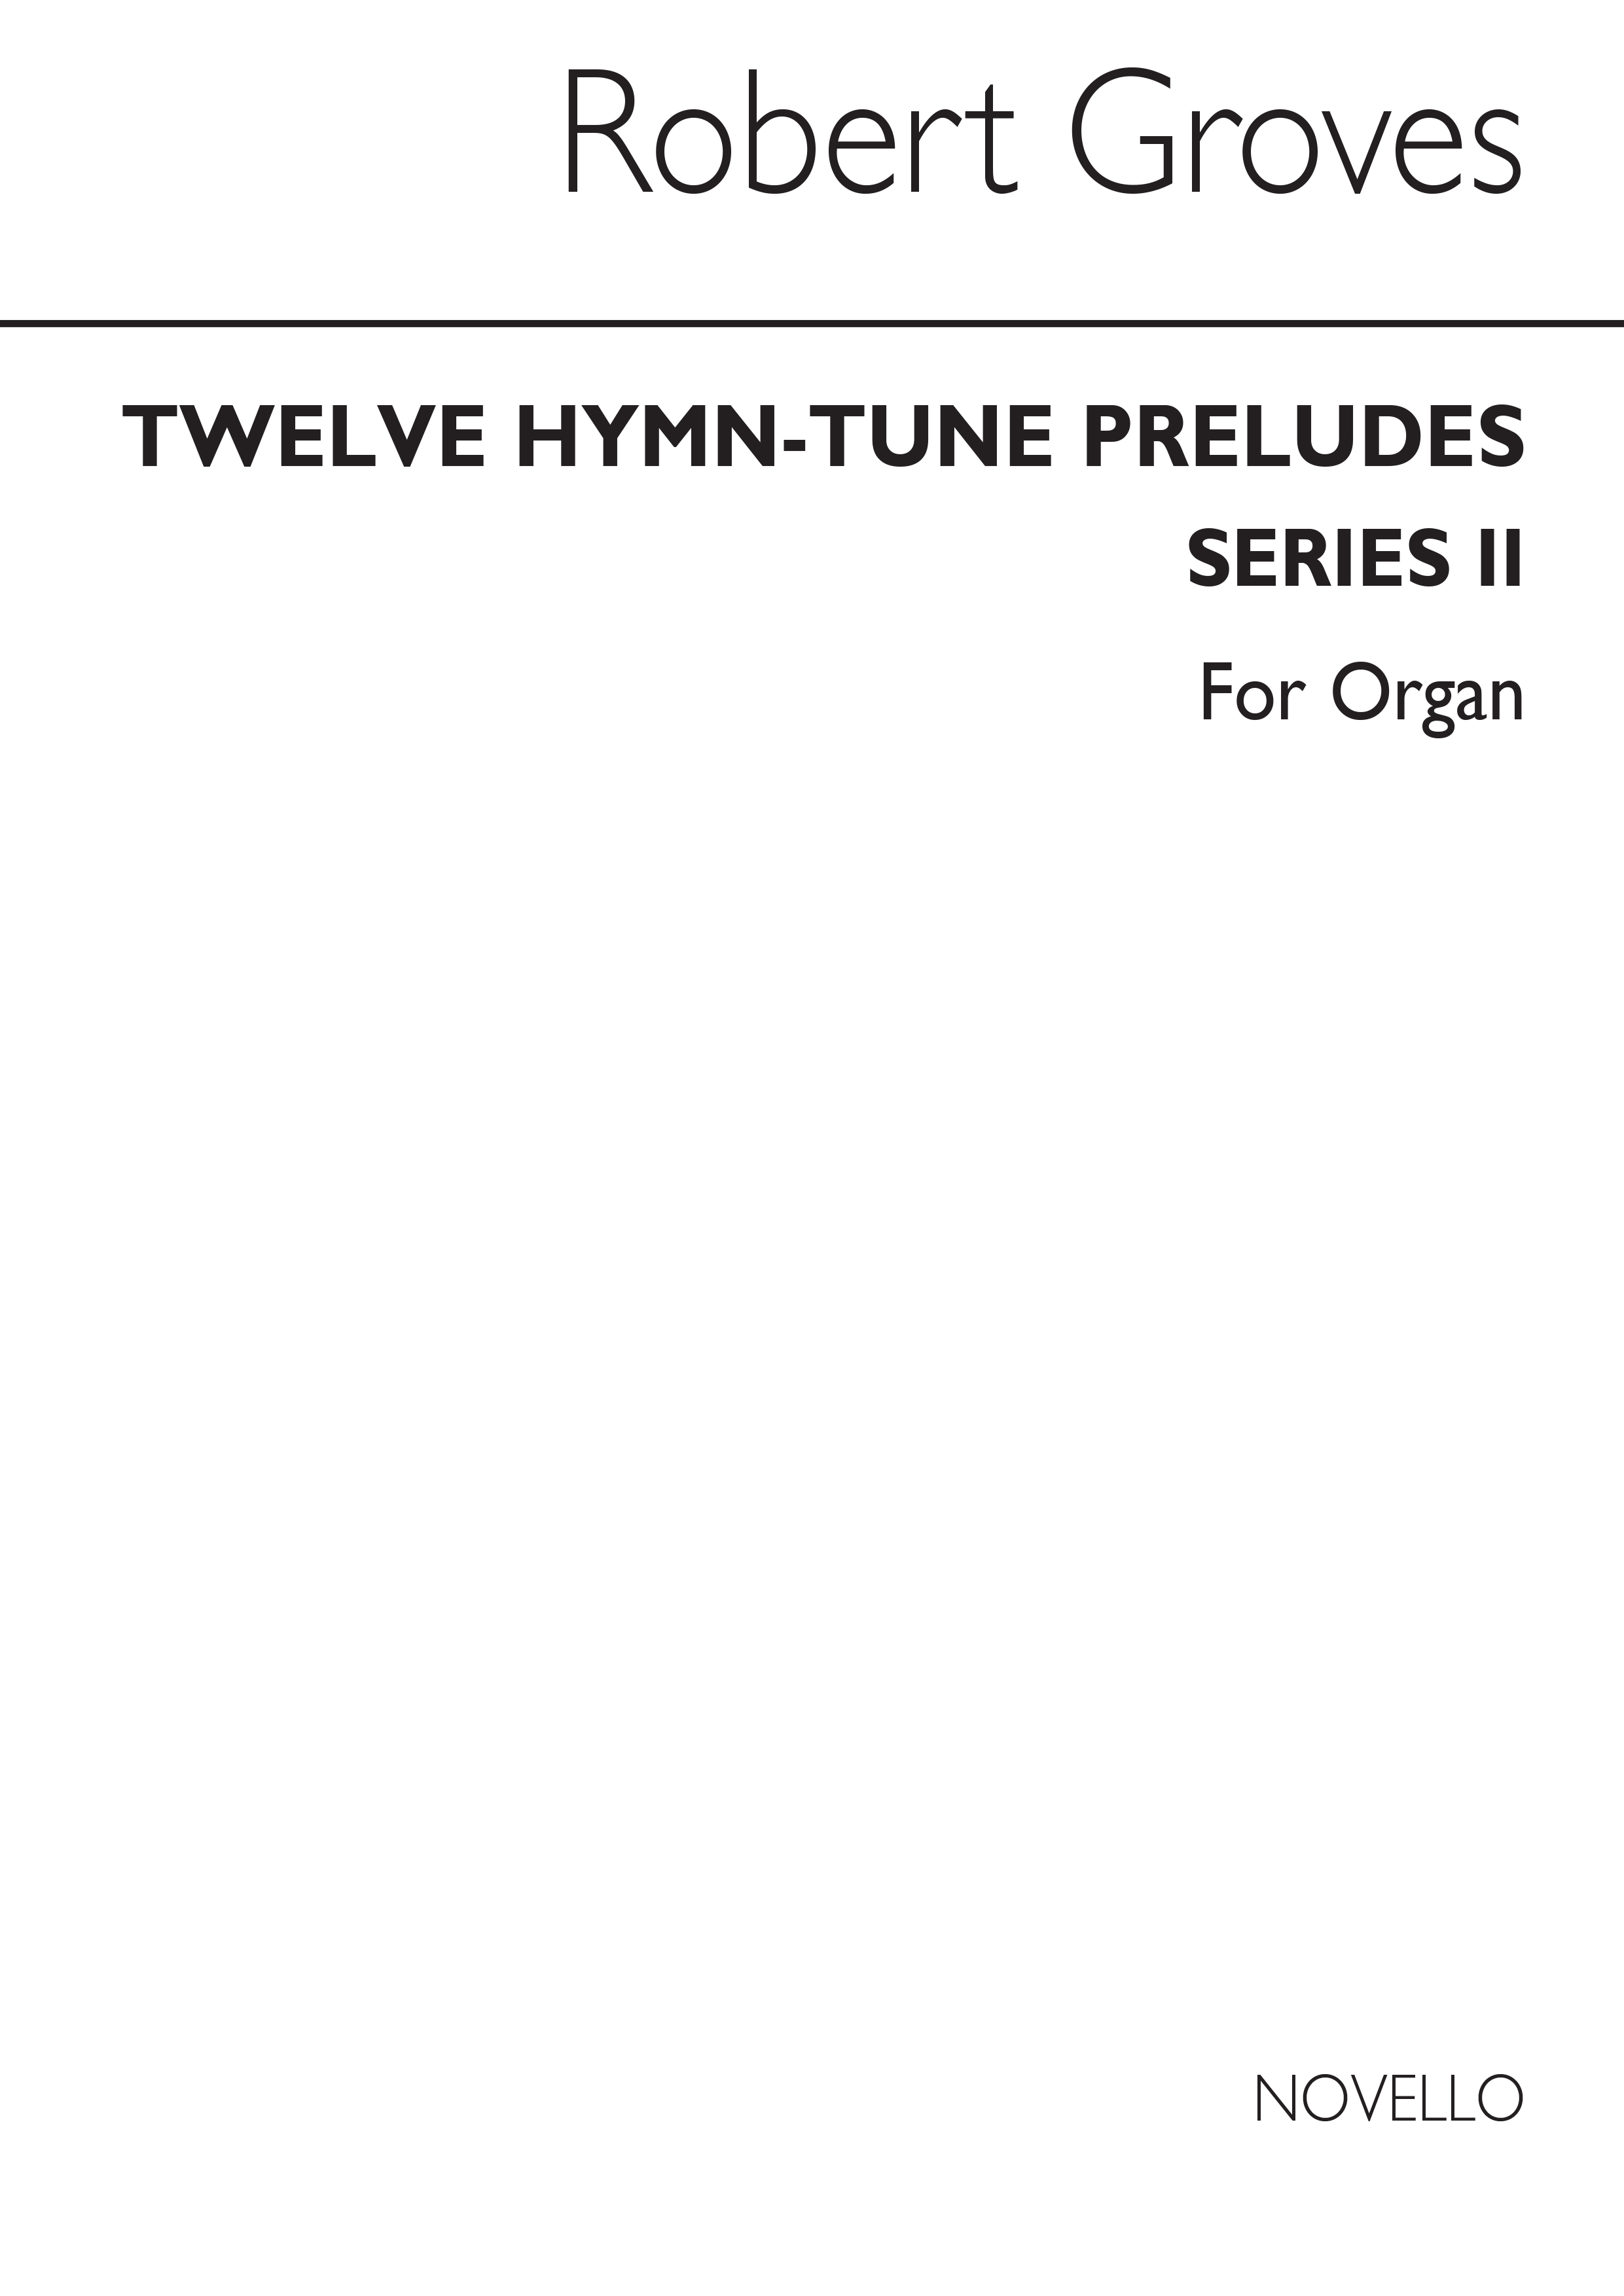 Groves, R 12 Hymn-tune Preludes Series 2 Organ With Or Without Pedals